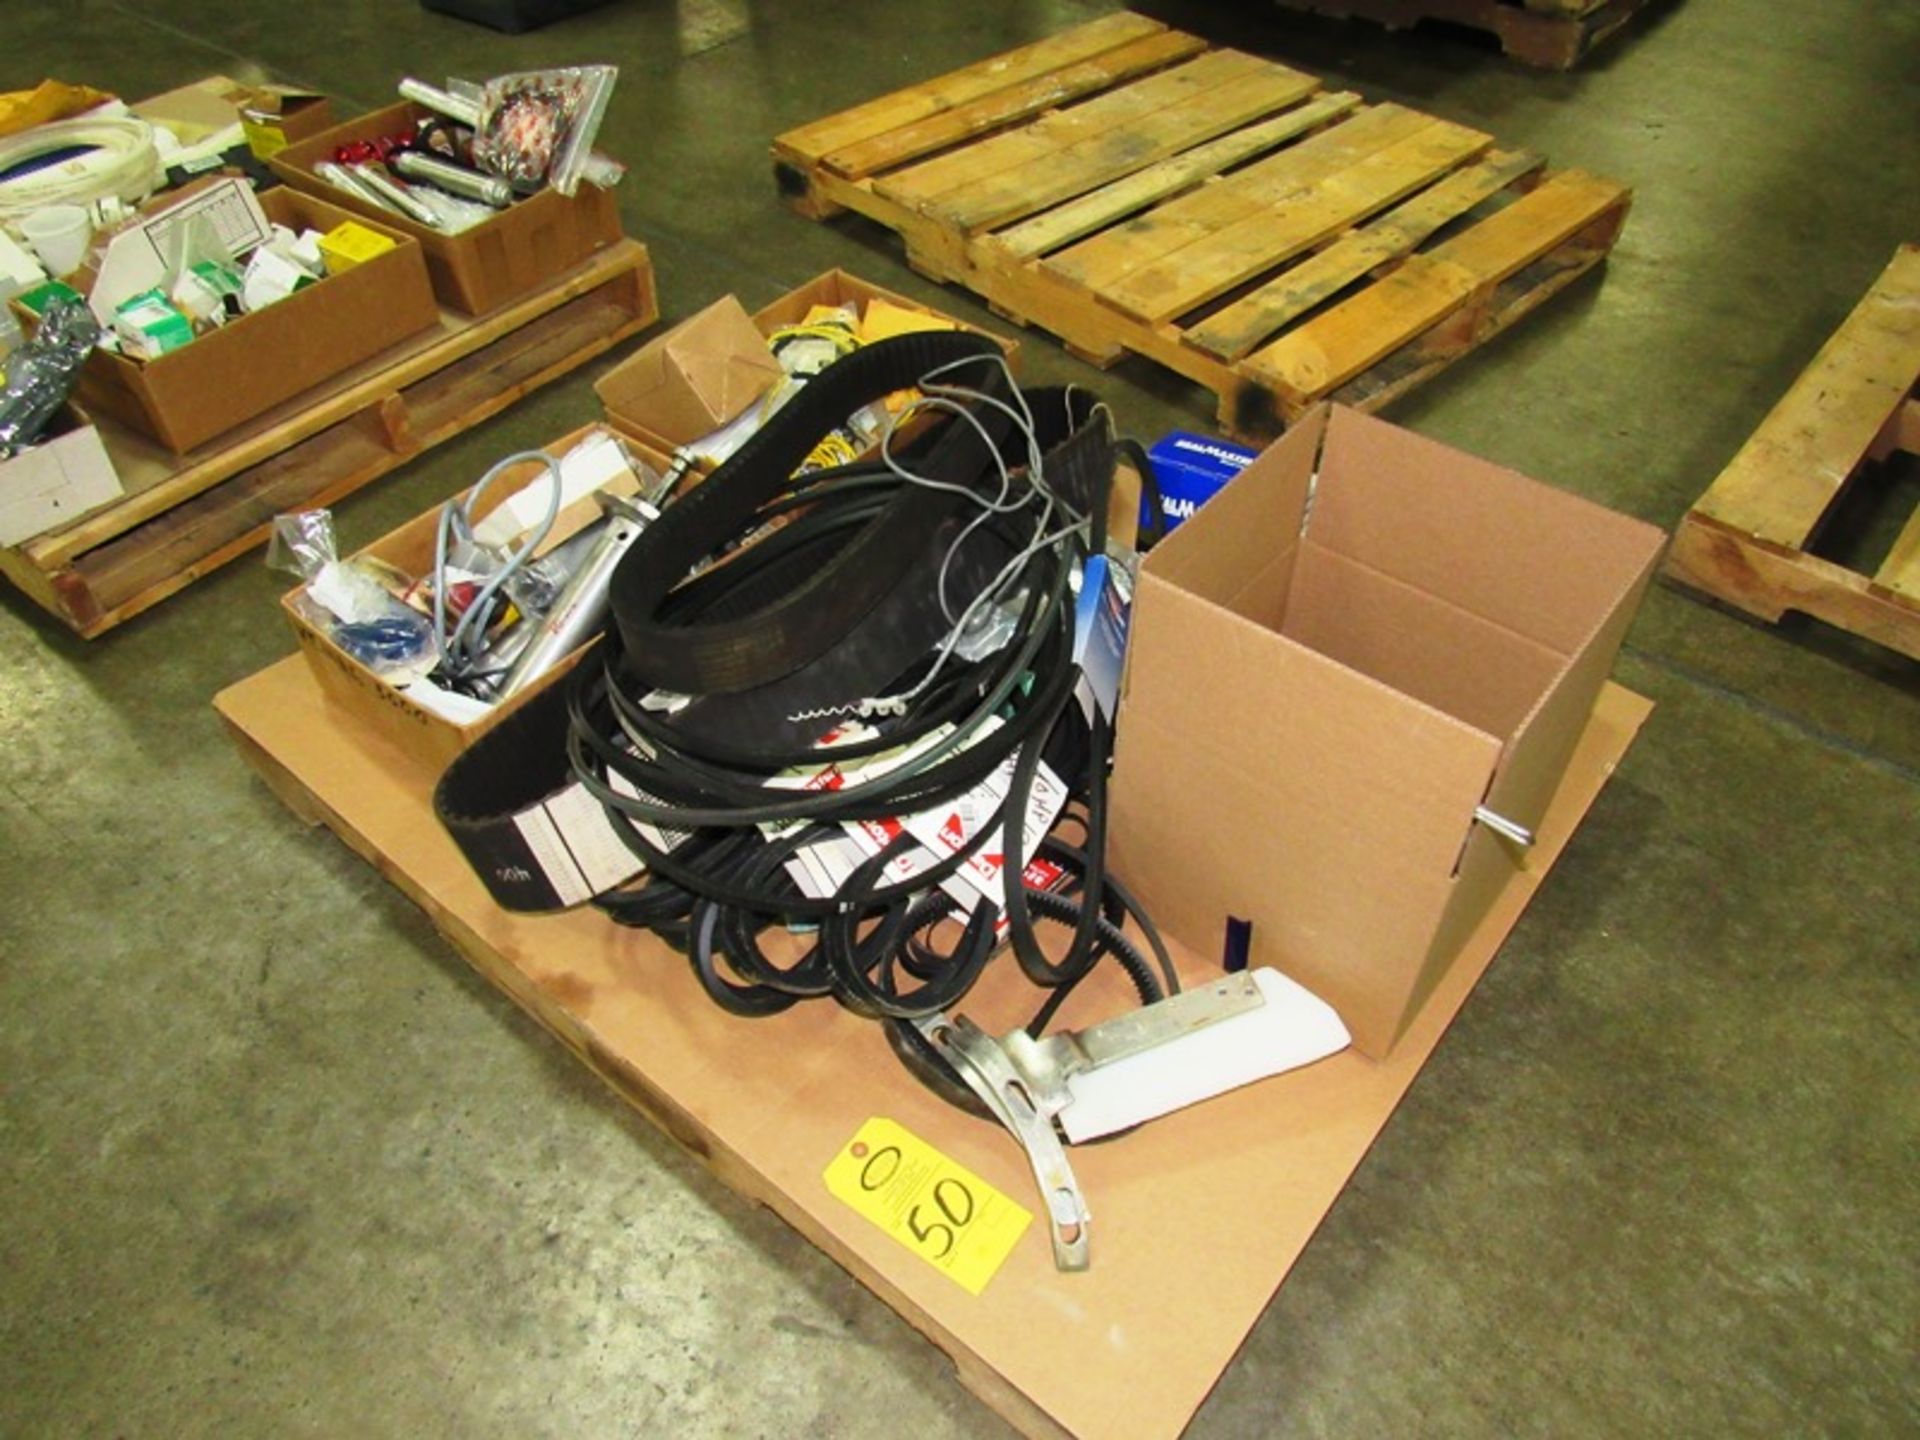 Skid of Mainly Vemag Parts: Belts, Filters, Photo Eye Sensors, Contactors, Gears, Pneumatic